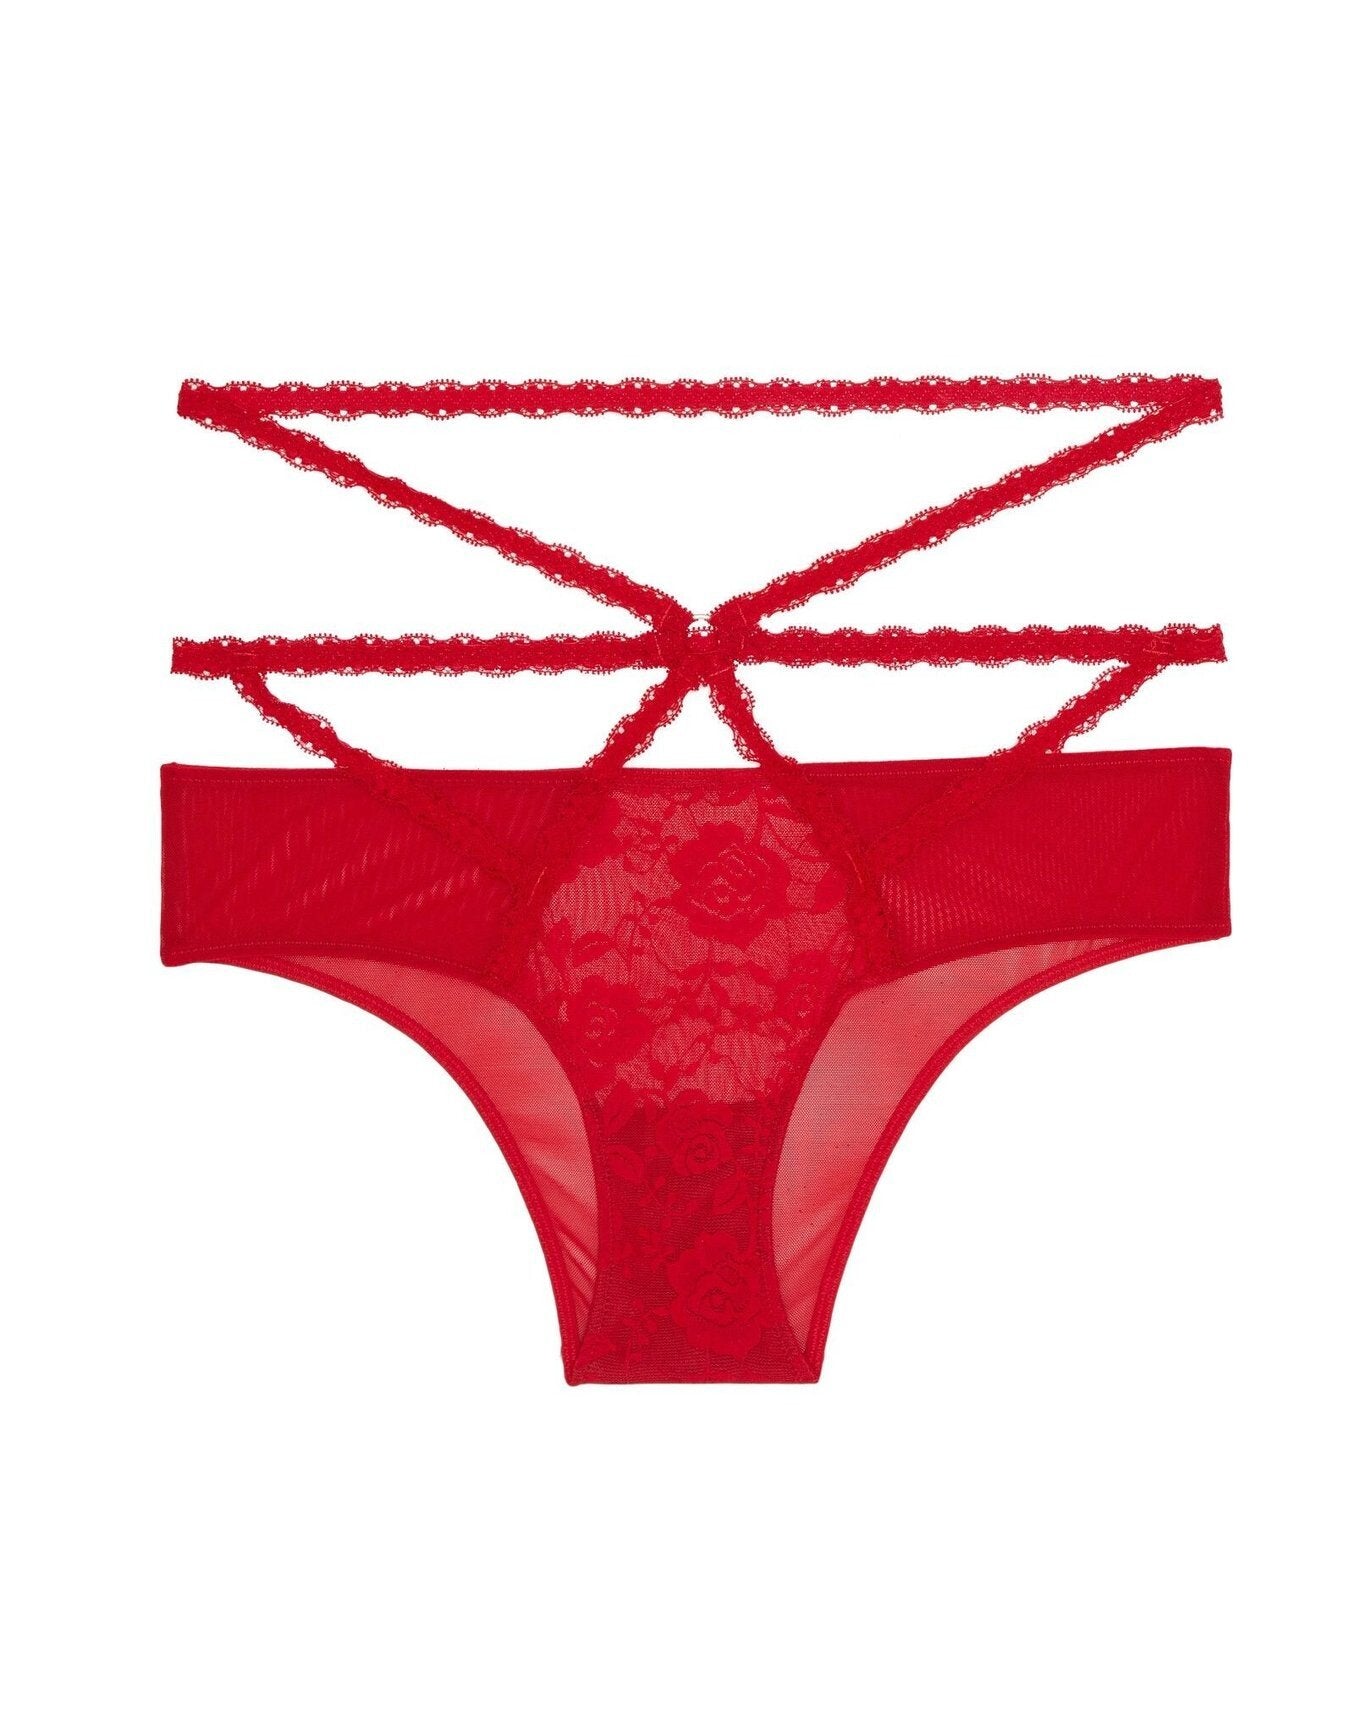 Adore Me Brigitte Cheeky in color Barbados Cherry and shape cheeky